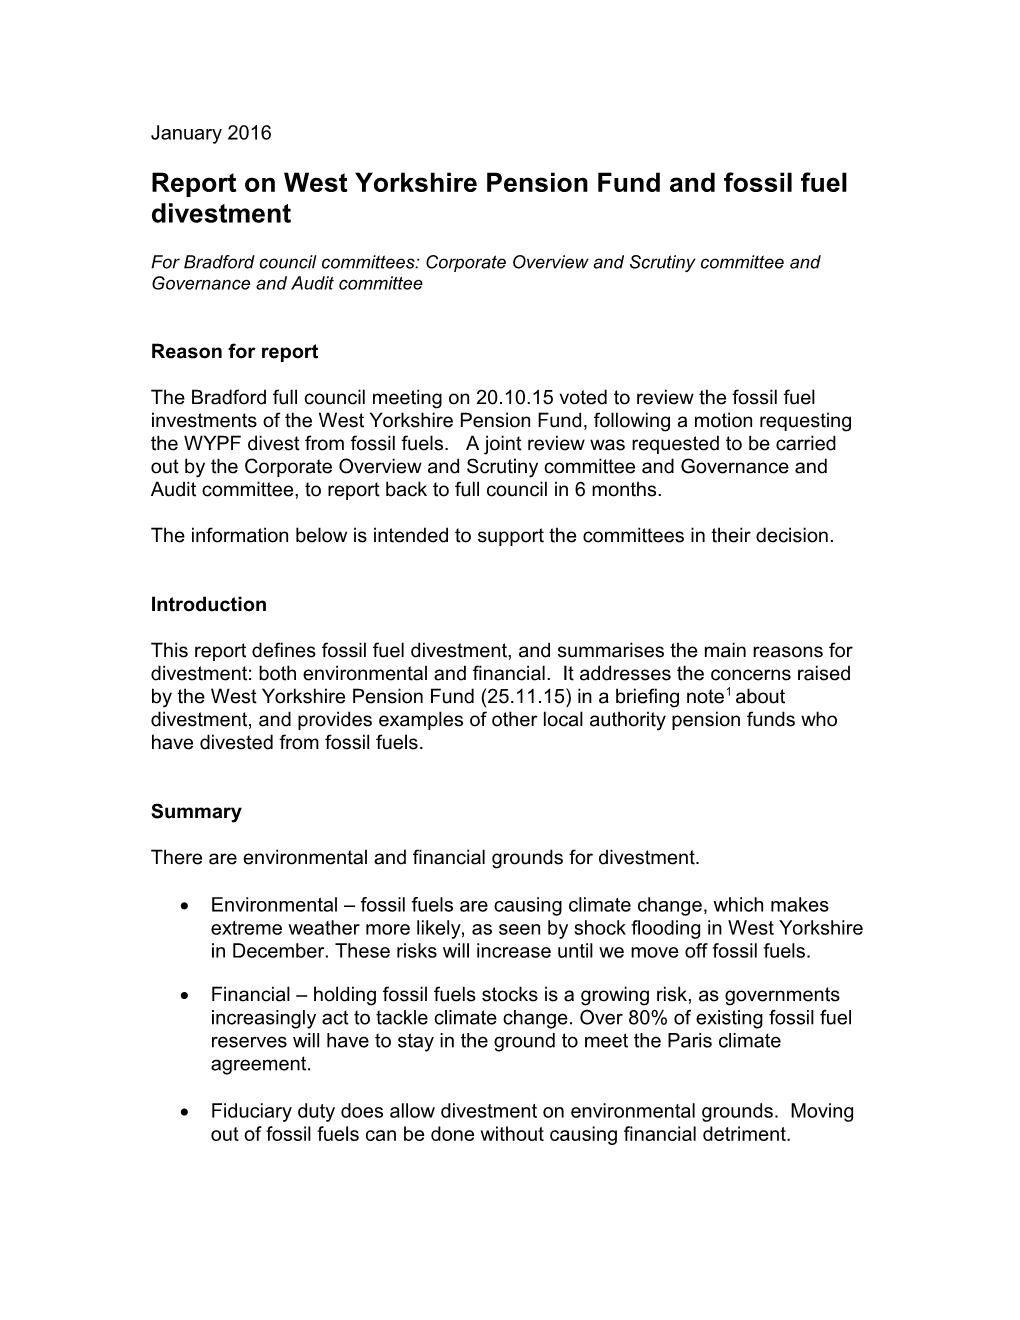 Report on West Yorkshire Pension Fund and Fossil Fuel Divestment